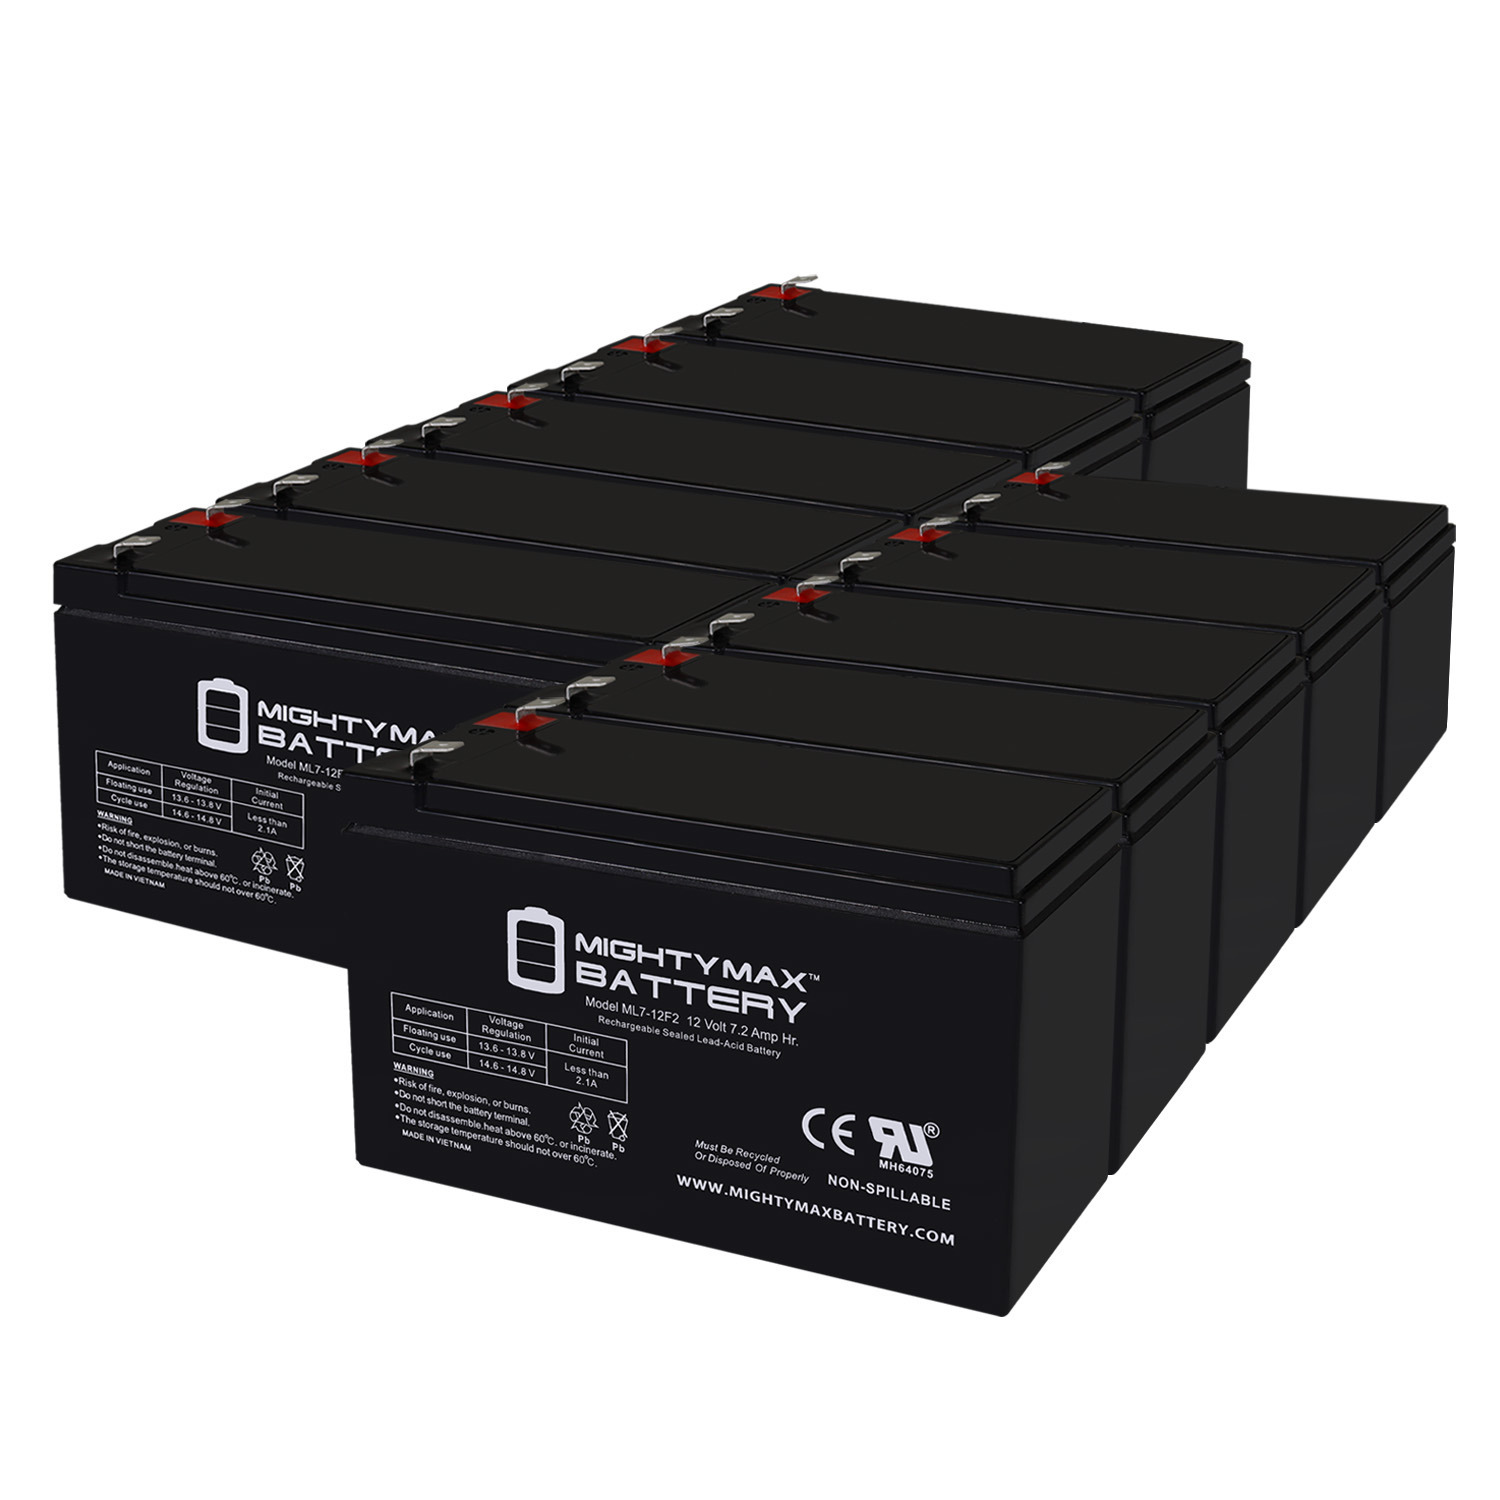 12V 7Ah F2 Replacement Battery for PowerWare PW9120-1000VA - 10 Pack